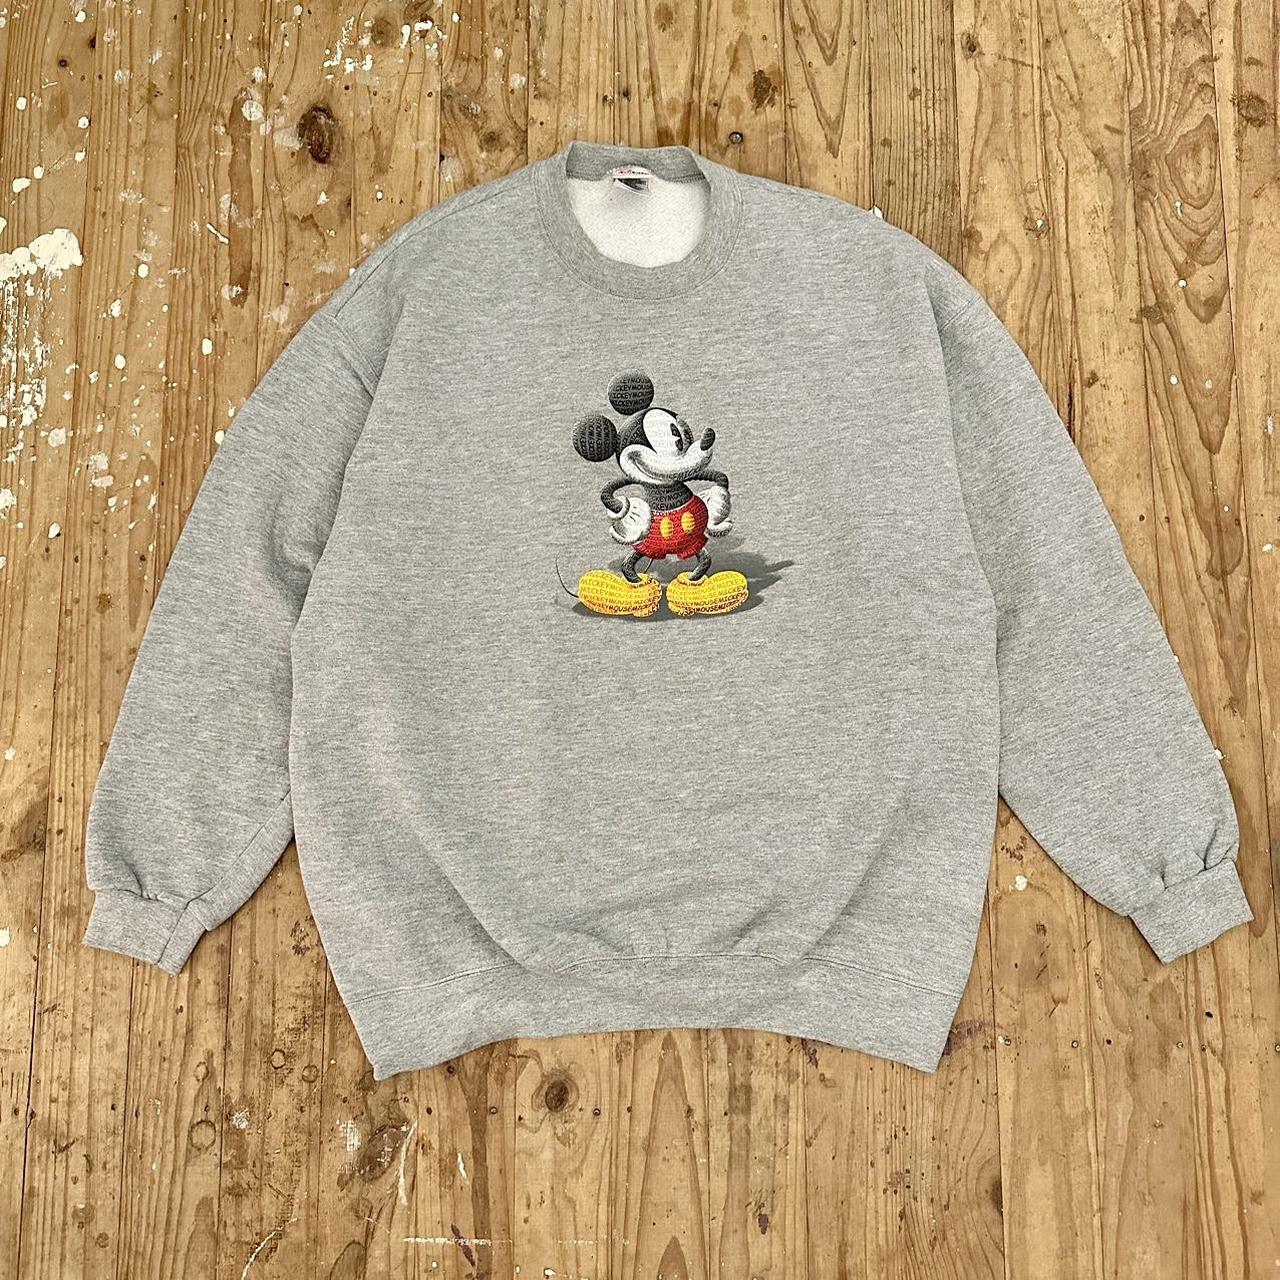 Vintage Mickey Mouse Jumper 90s Classic 90s... - Depop